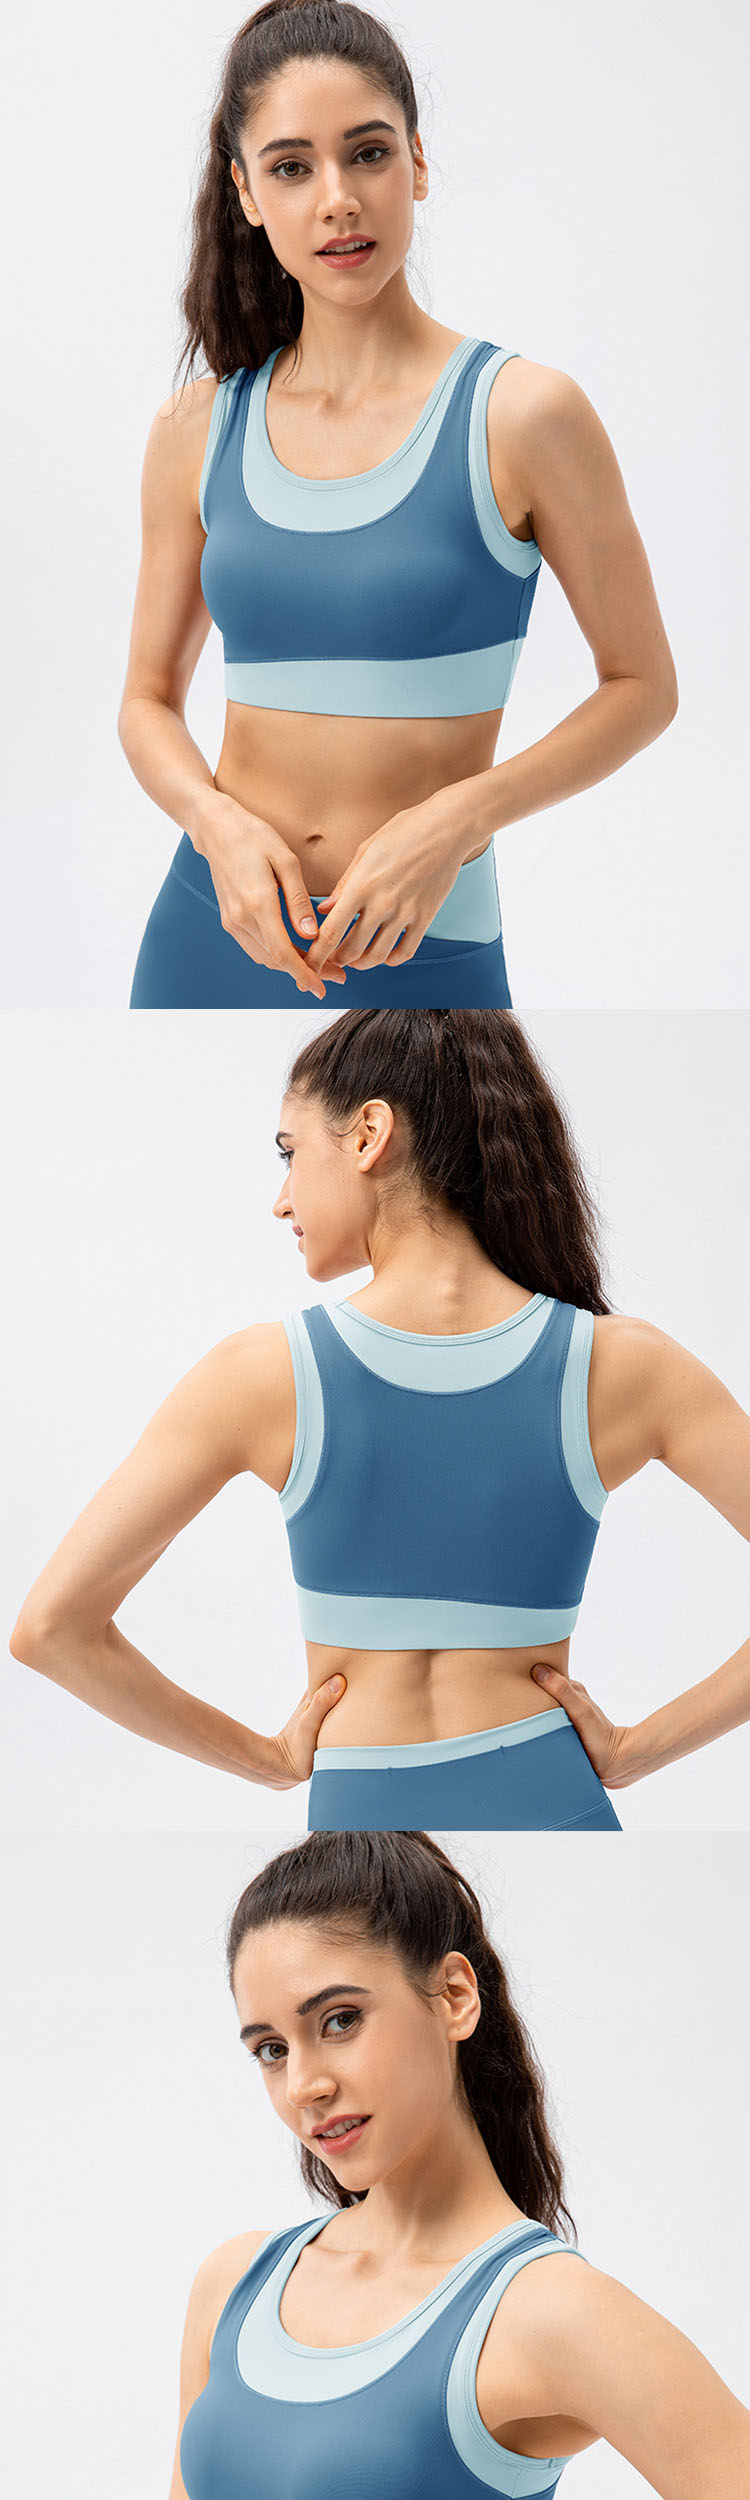 High-quality fabric is used to fit the body and absorb moisture and sweat